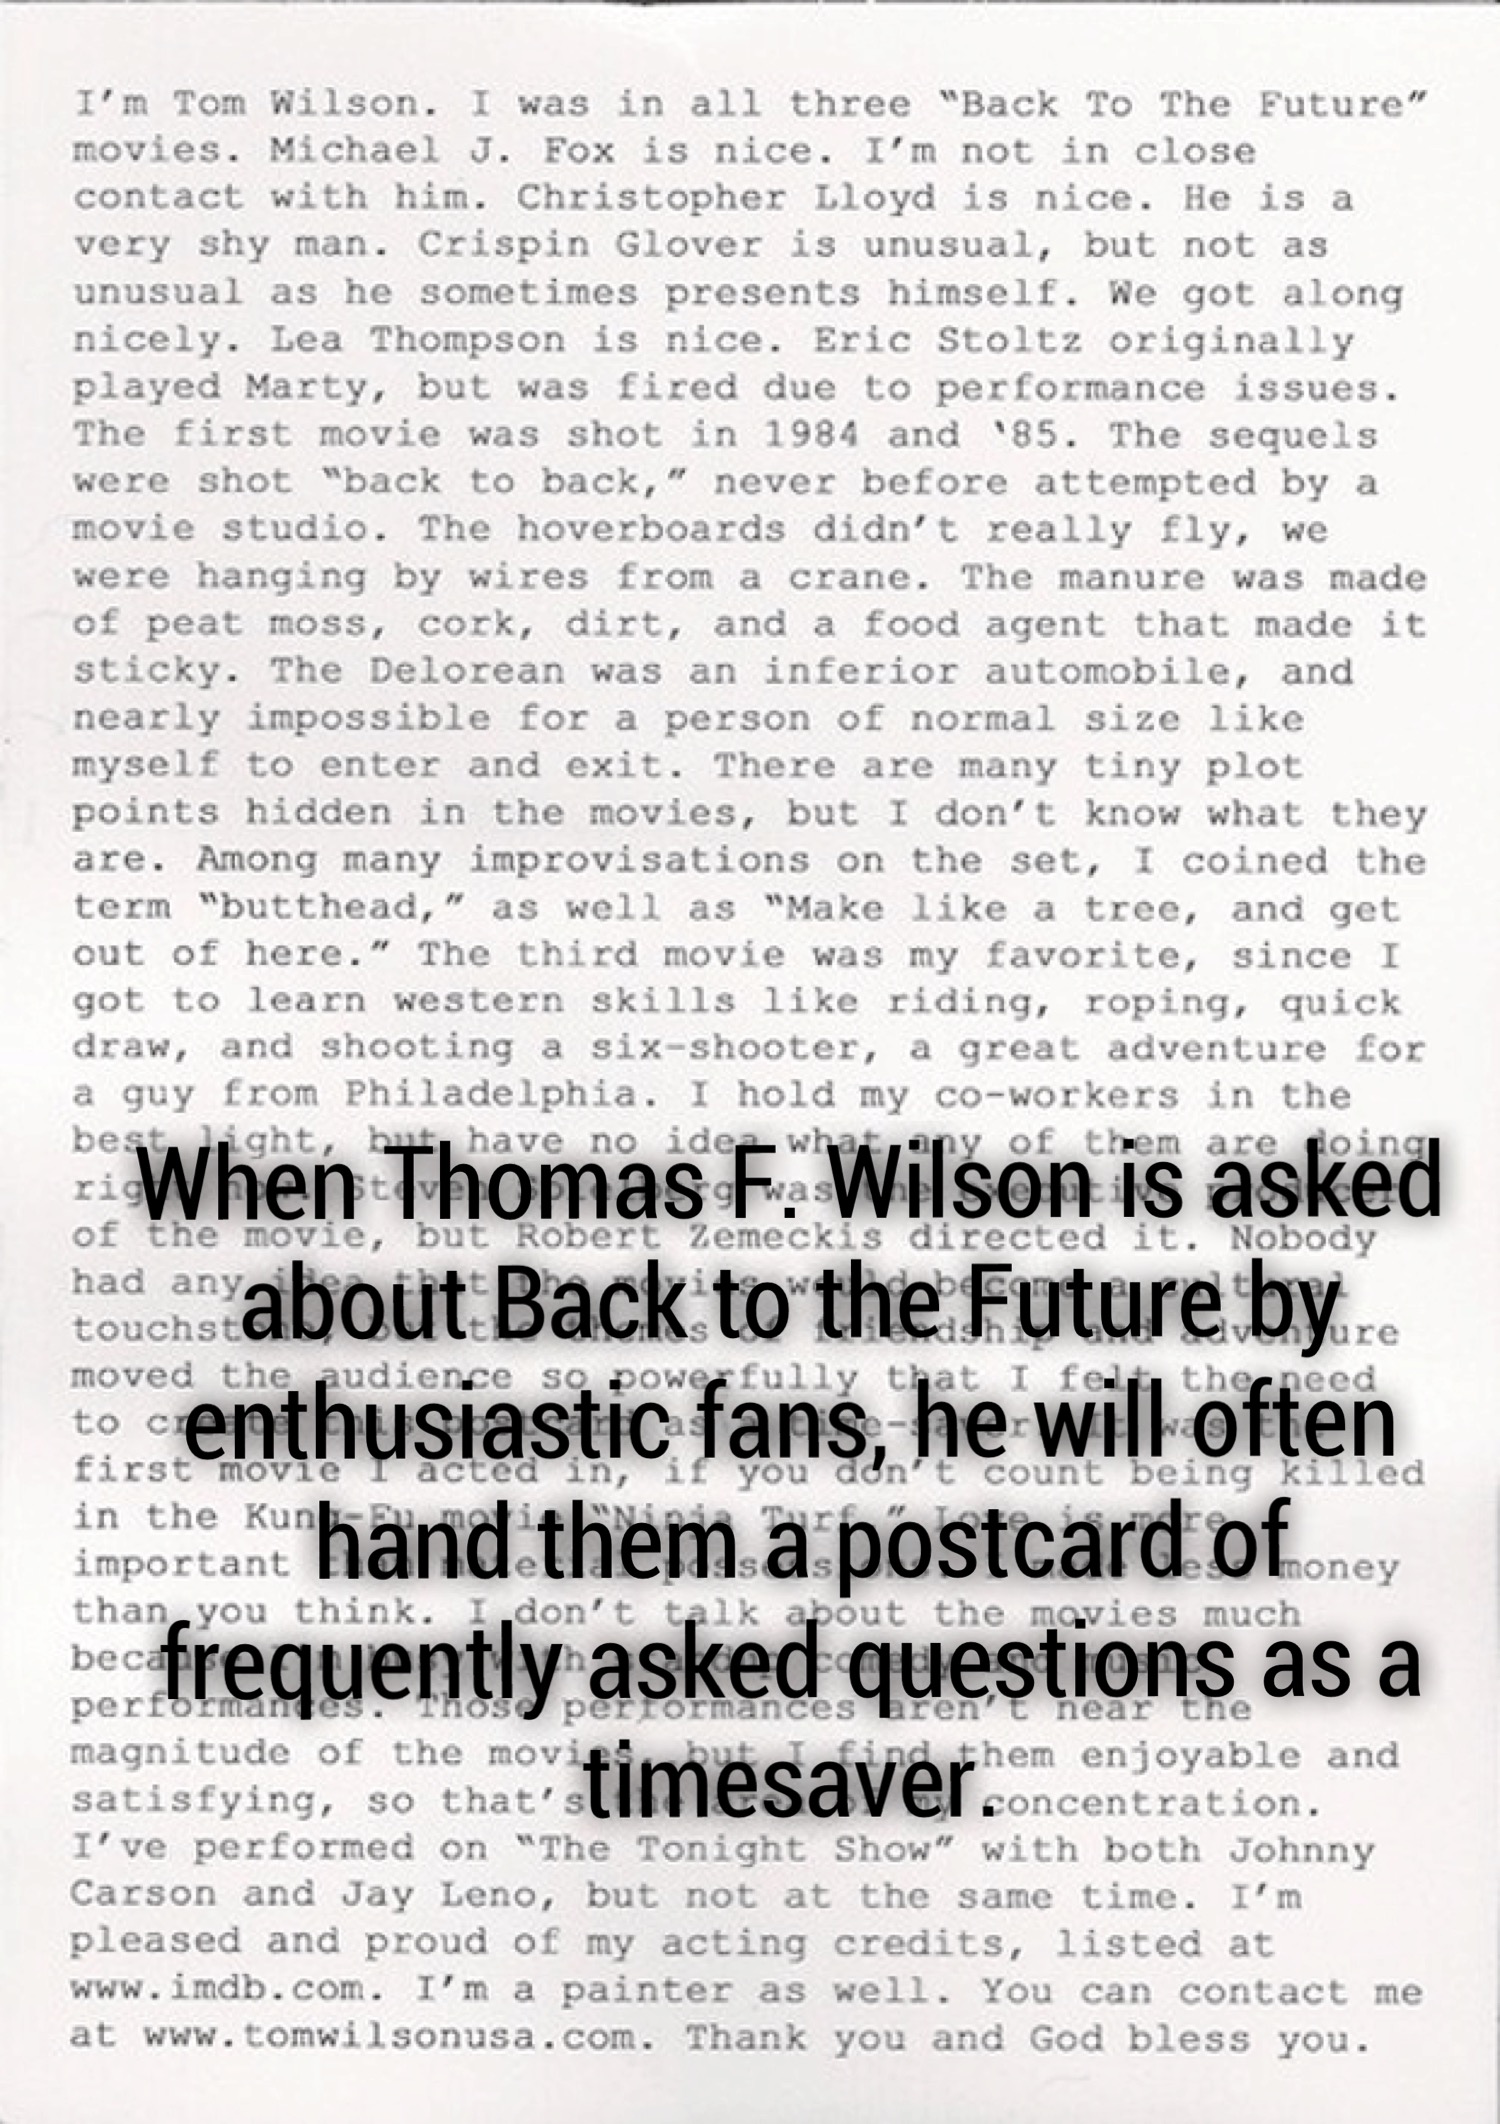 newspaper - Tom Tom Wilson. I was in all three "Back To The Future movies. Michael J. Fox is nice. I'm not in close contact with him. Christopher Lloyd is nice. It is a very shy man. Crispin Glover is unusual, but not as unusual as he sometimes presents h